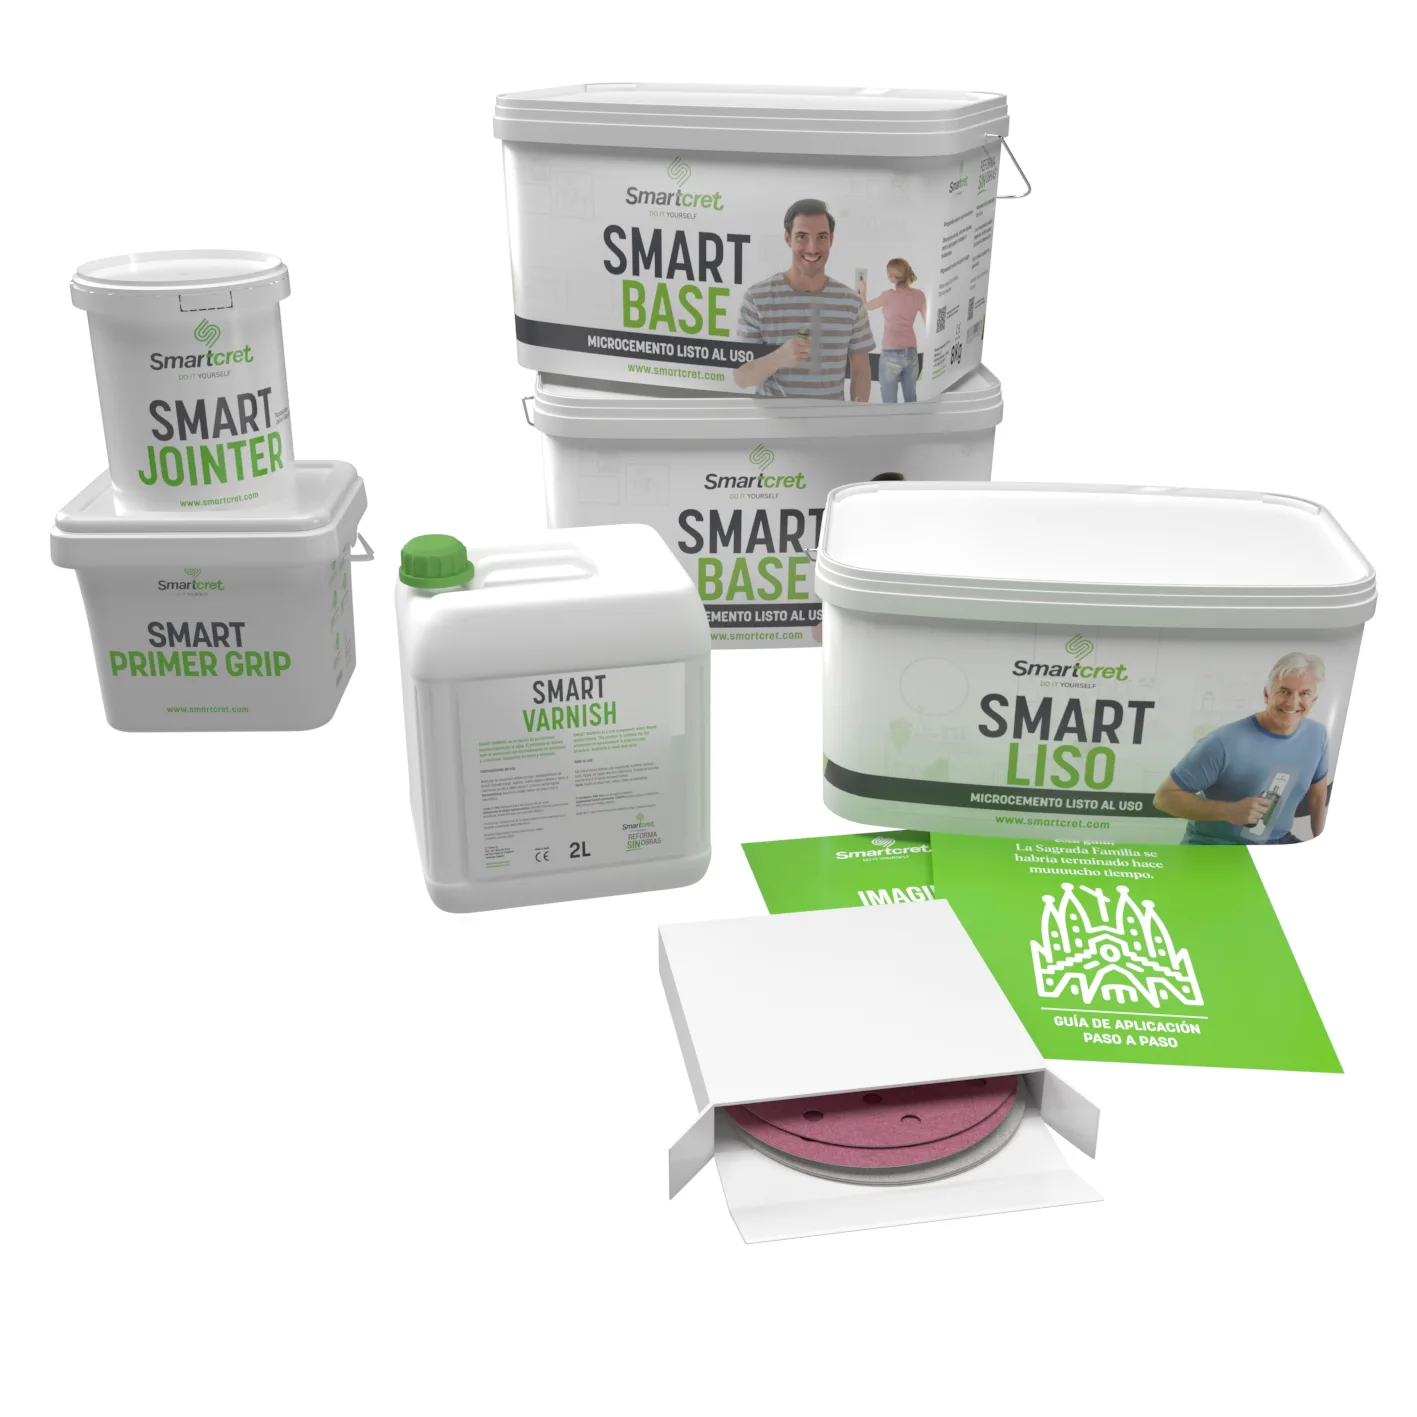 Smart Kit Non-absorbent surfaces